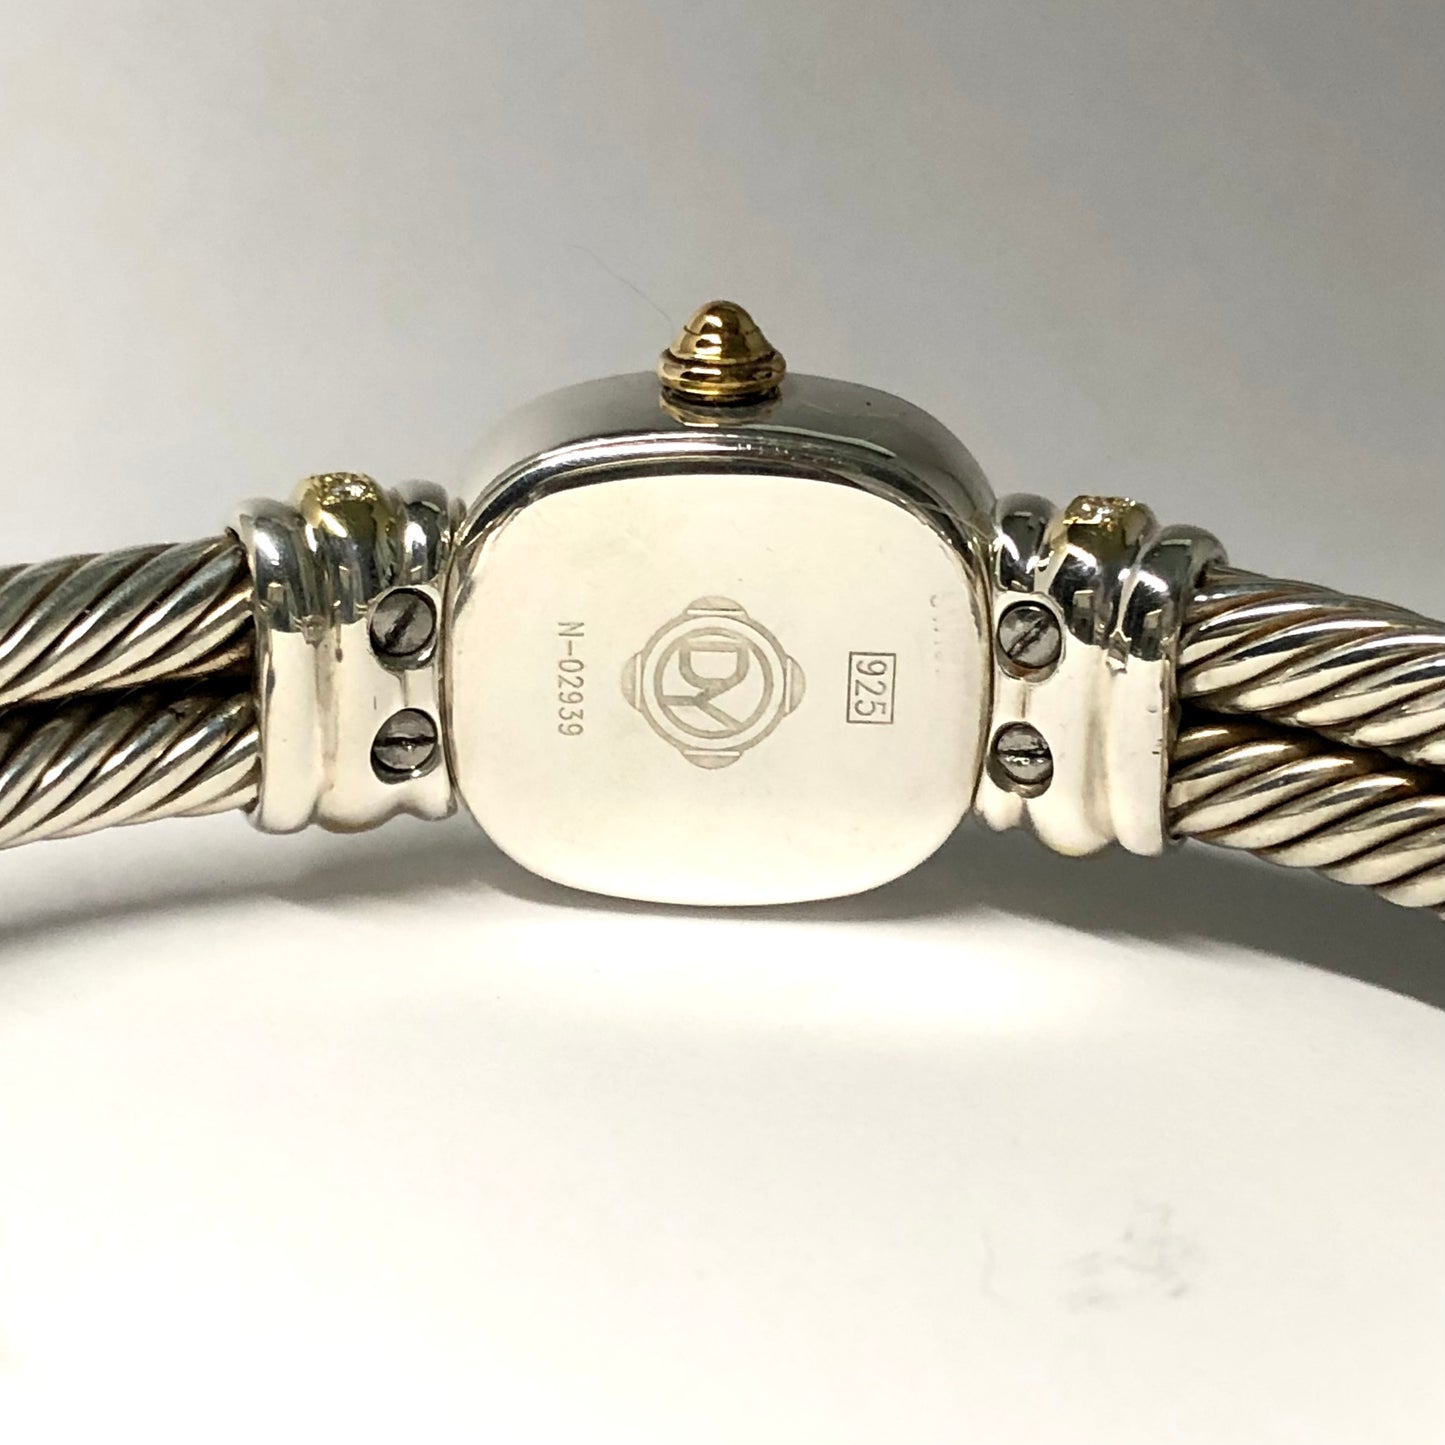 DAVID YURMAN CHELSEA 925 Silver & Gold Plated Cable Bracelet Watch 0.66TCW DIAMONDS Mother Of Pearl Dial